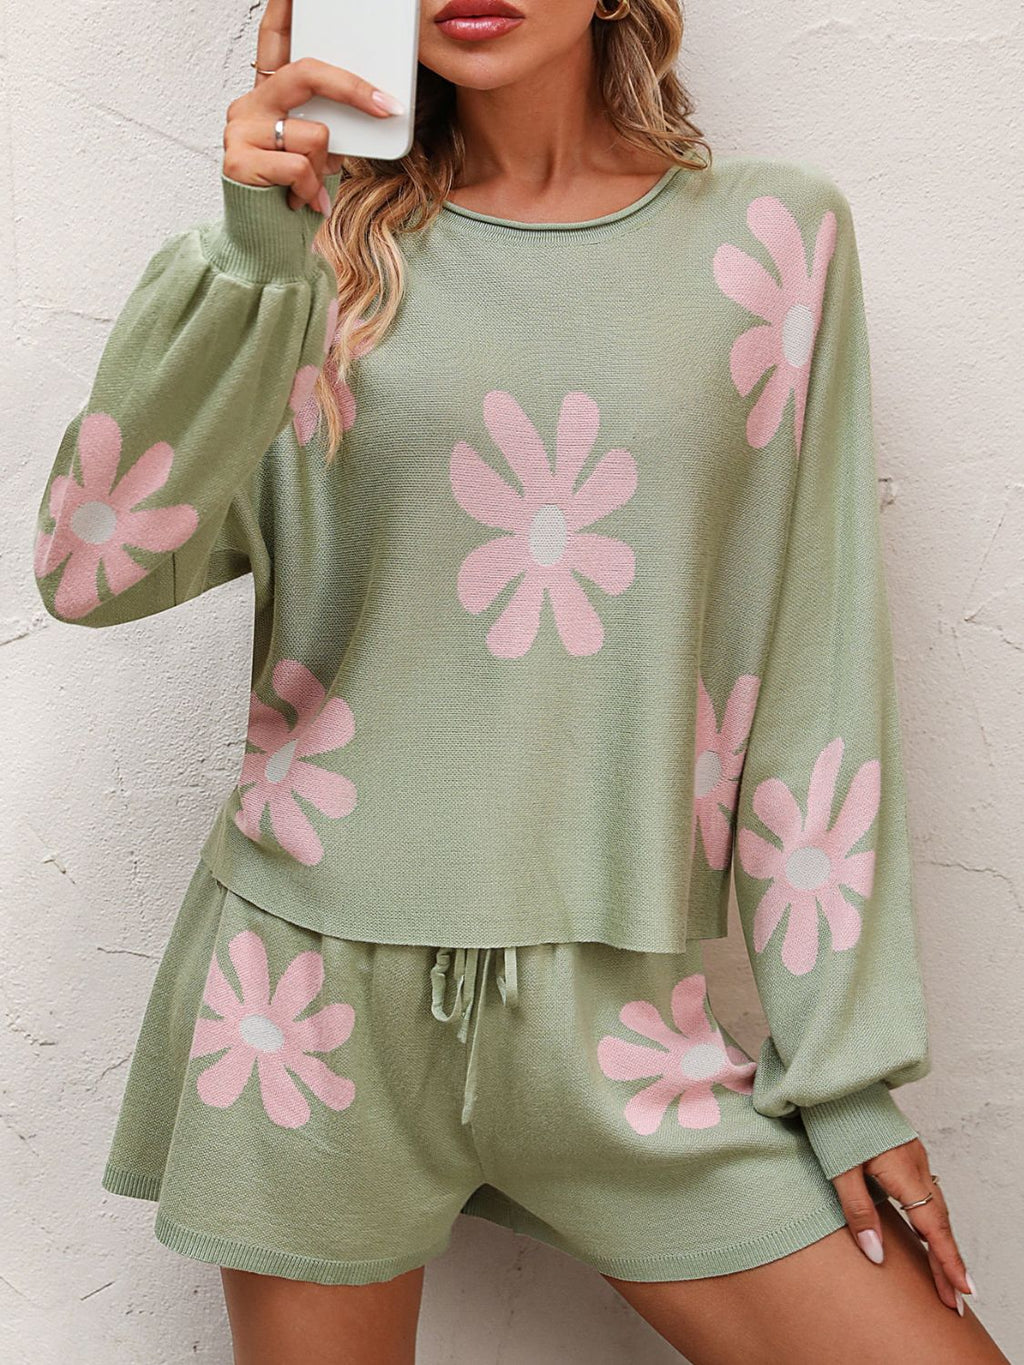 Daisy Sweater Shorts Set - ONLINE EXCLUSIVE